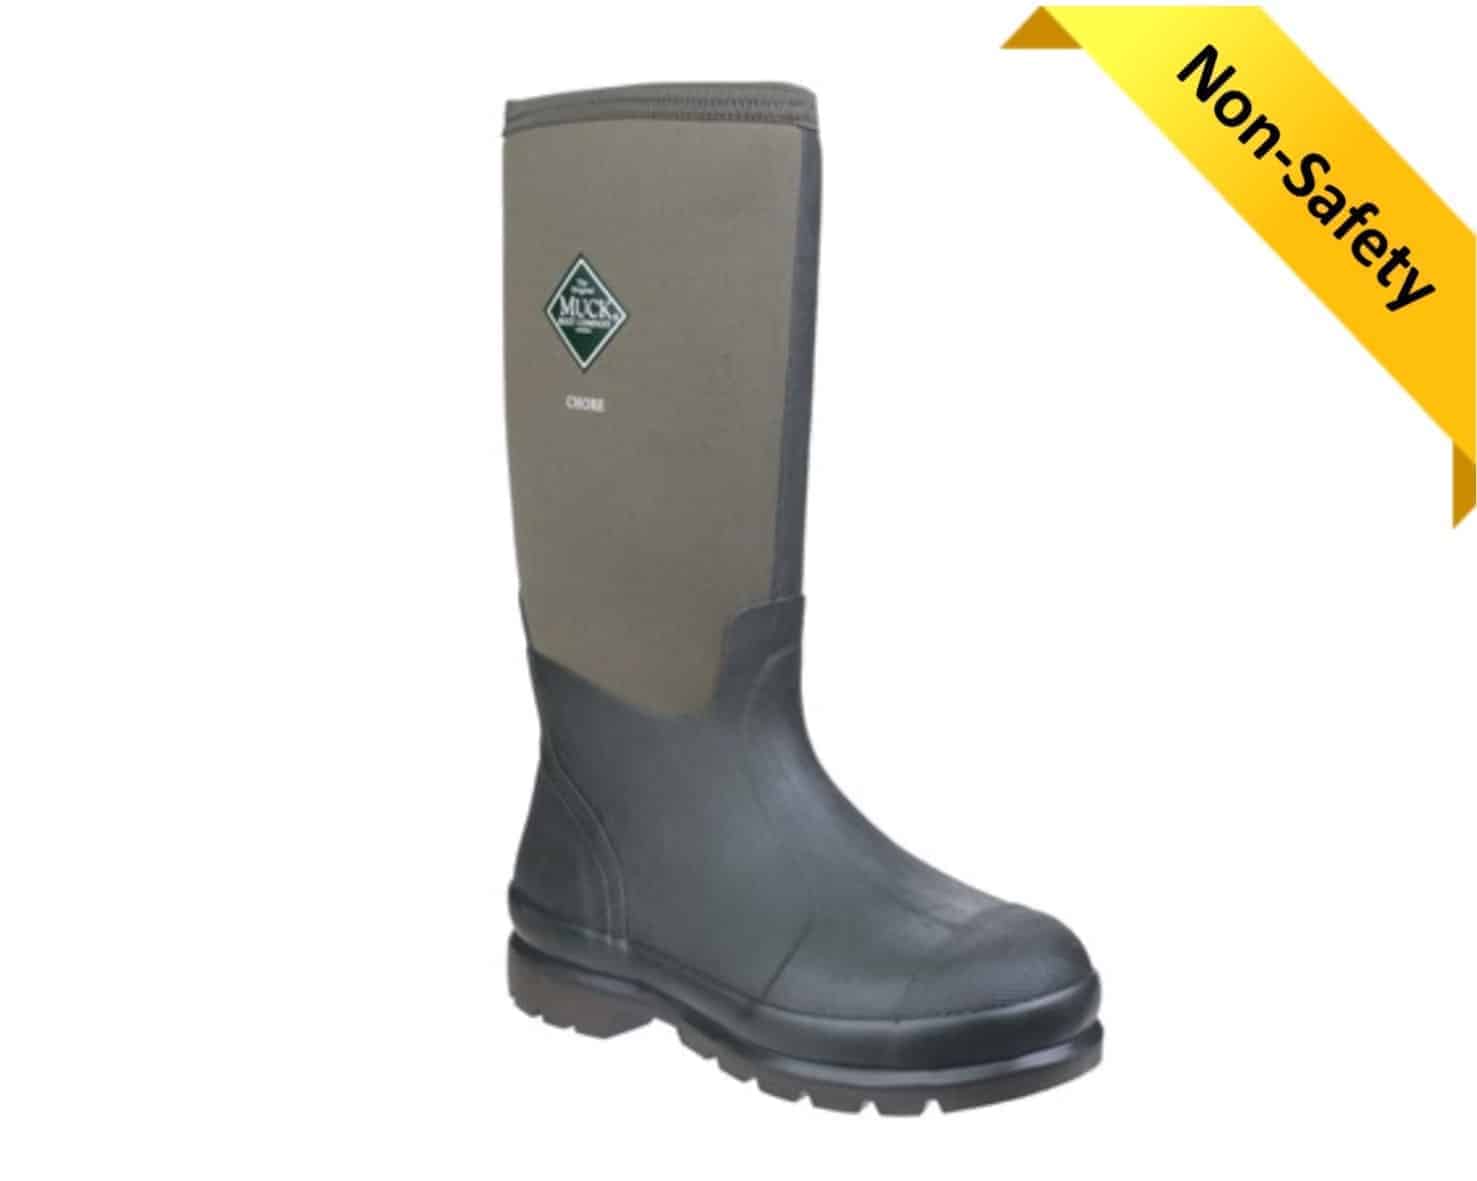 Muck Chore Classic Mens Rubber Work Boots Muck Chore Classic Men's Rubber Work Boots The Original Muck Boot Company Footwear CHH-000A 